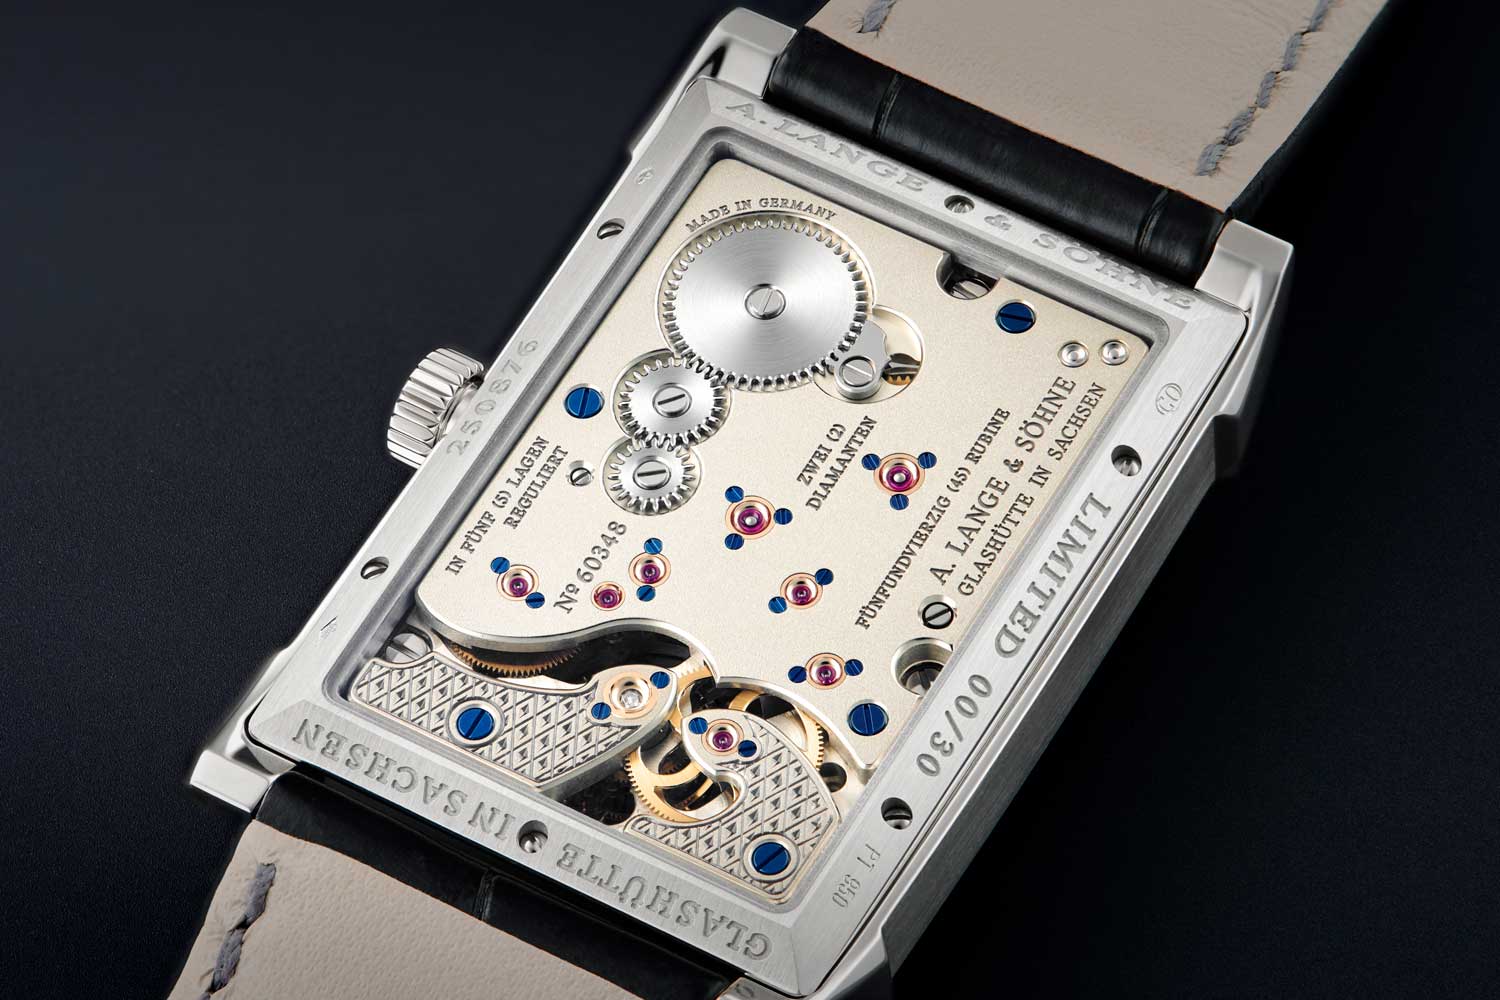 The Lange manufacture calibre L042.1, manually wound, decorated and assembled twice by hand; three-quarter plate made of untreated German silver; tourbillon and intermediate wheel cocks engraved by hand (©Revolution)